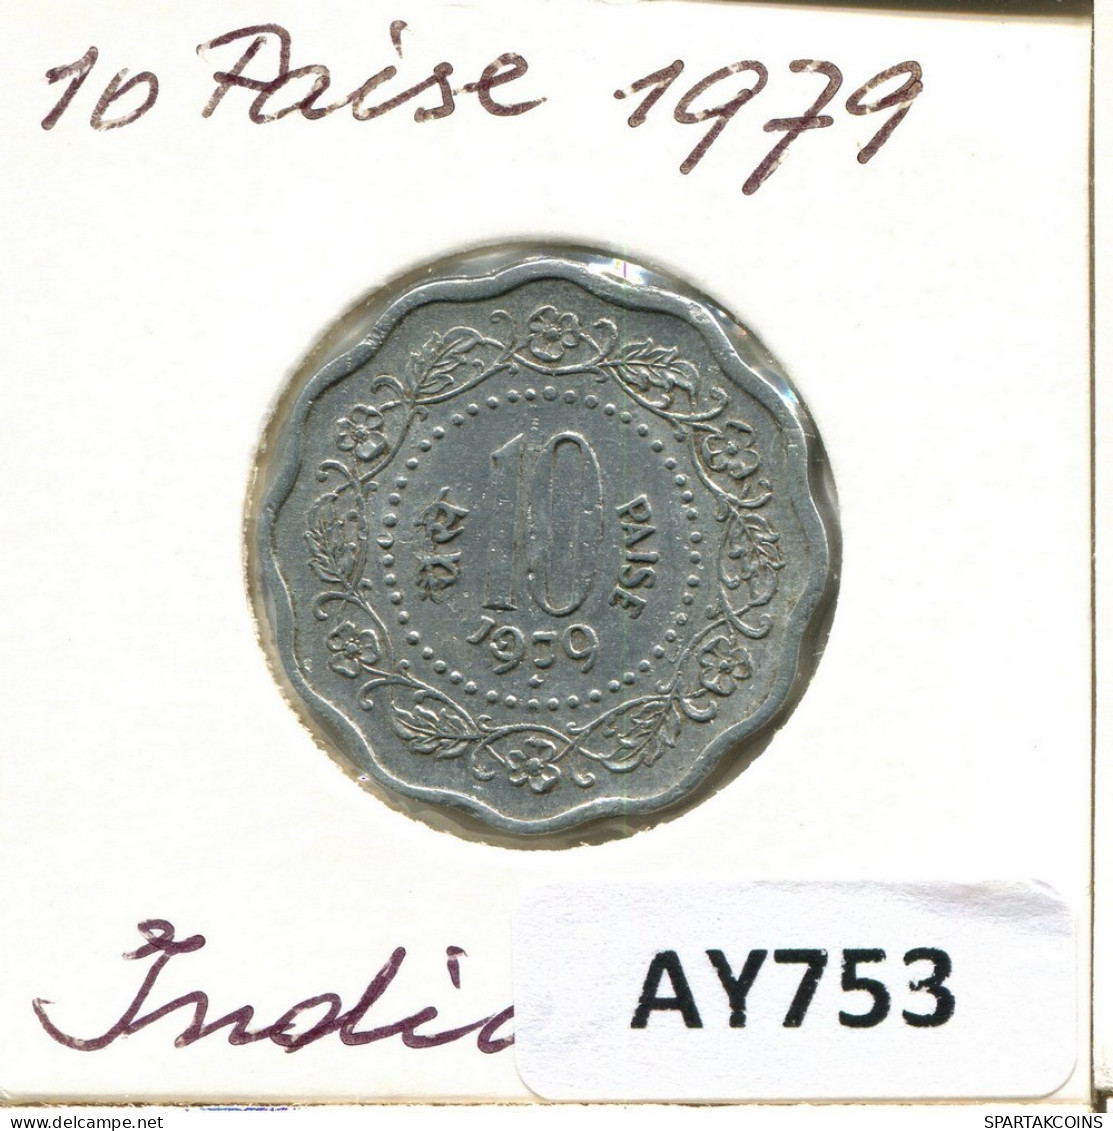 10 PAISE 1979 INDIEN INDIA Münze #AY753.D.A - India